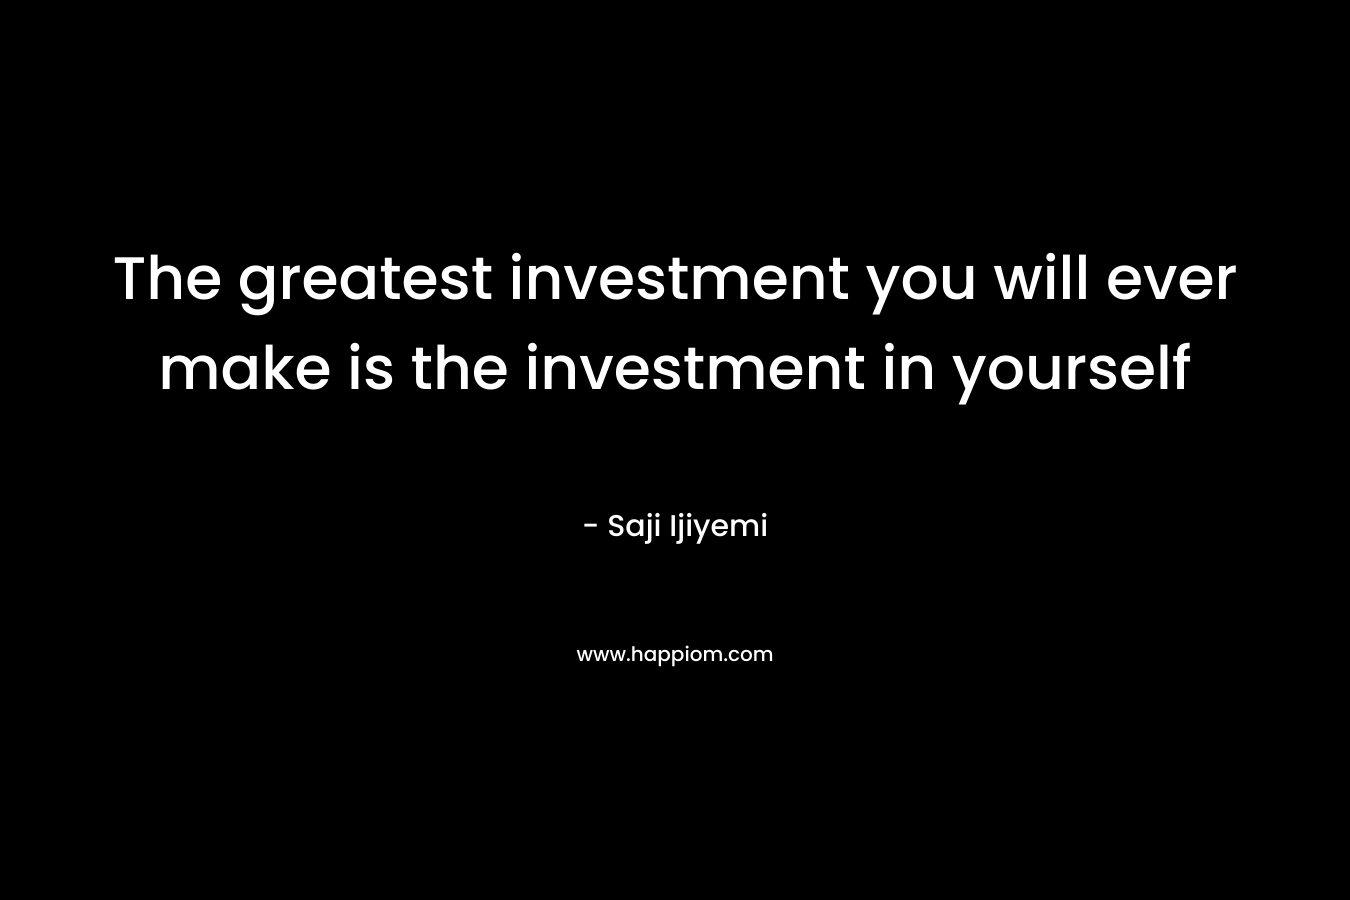 The greatest investment you will ever make is the investment in yourself